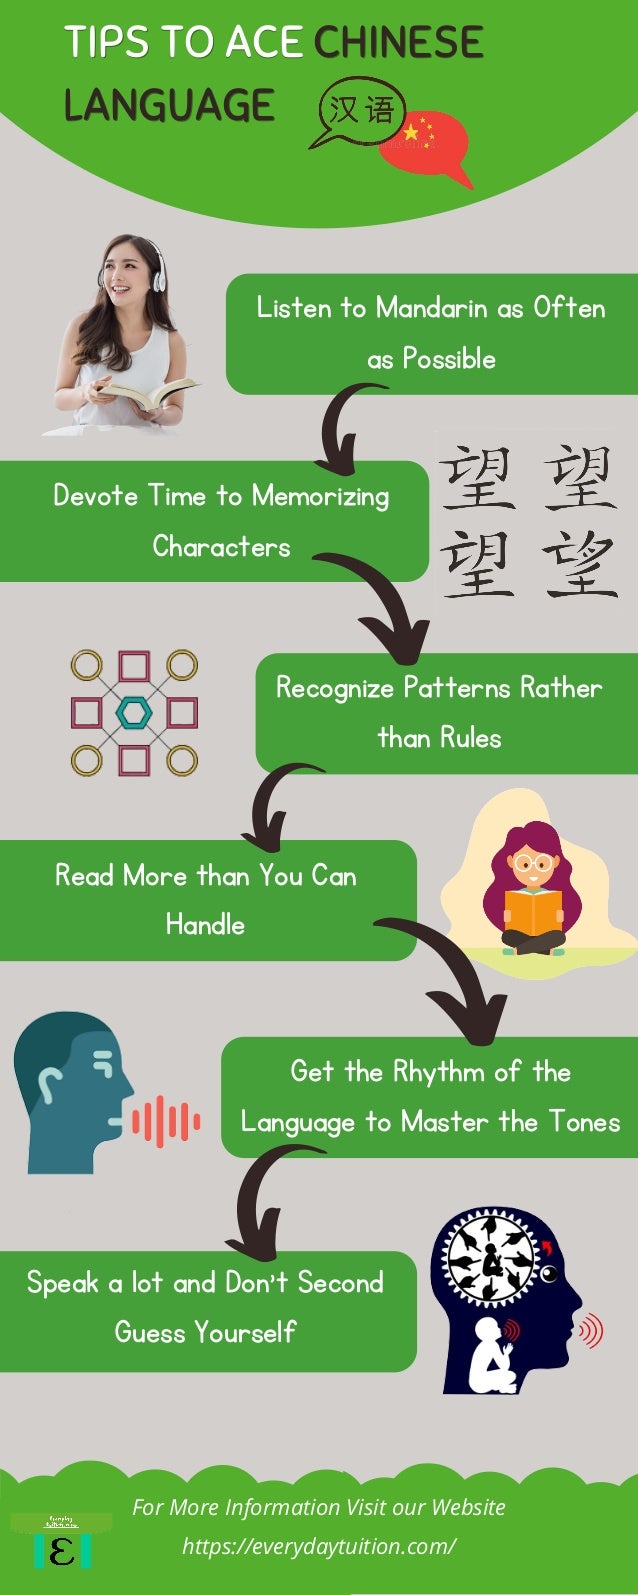 Listen to Mandarin as Often
as Possible
Devote Time to Memorizing
Characters
Recognize Patterns Rather
than Rules
Speak a lot and Don’t Second
Guess Yourself
Get the Rhythm of the
Language to Master the Tones
TIPS TO ACE
TIPS TO ACE CHINESE
CHINESE
LANGUAGE
LANGUAGE
Read More than You Can
Handle
For More Information Visit our Website
https://everydaytuition.com/
 